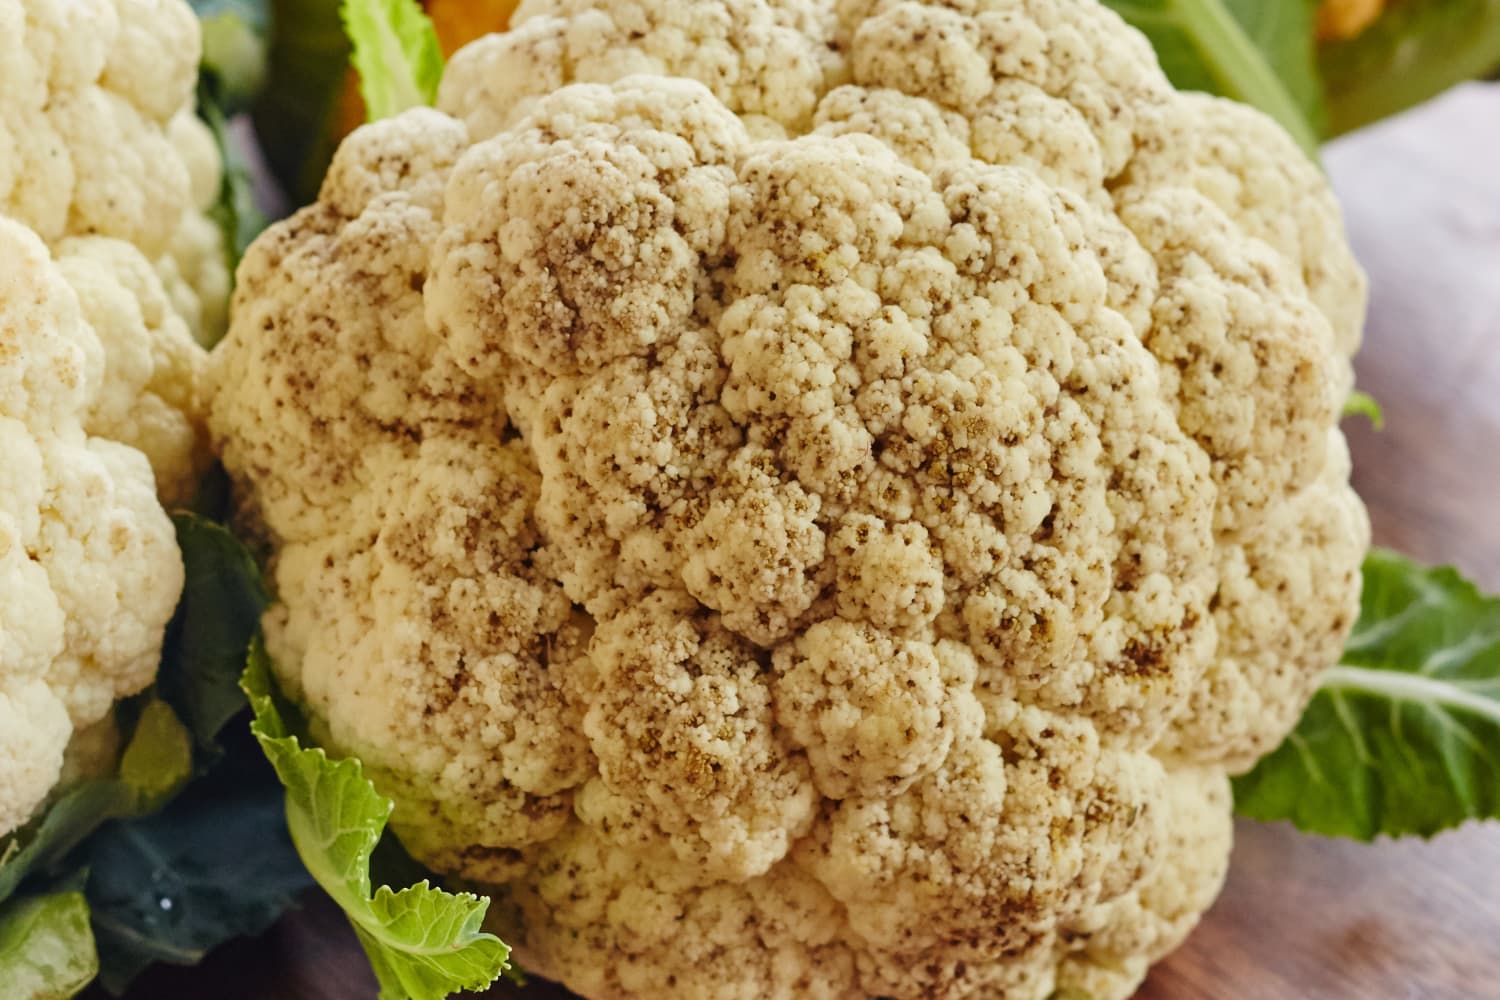 What Are Those Brown Spots on My Cauliflower? - The Kitchn